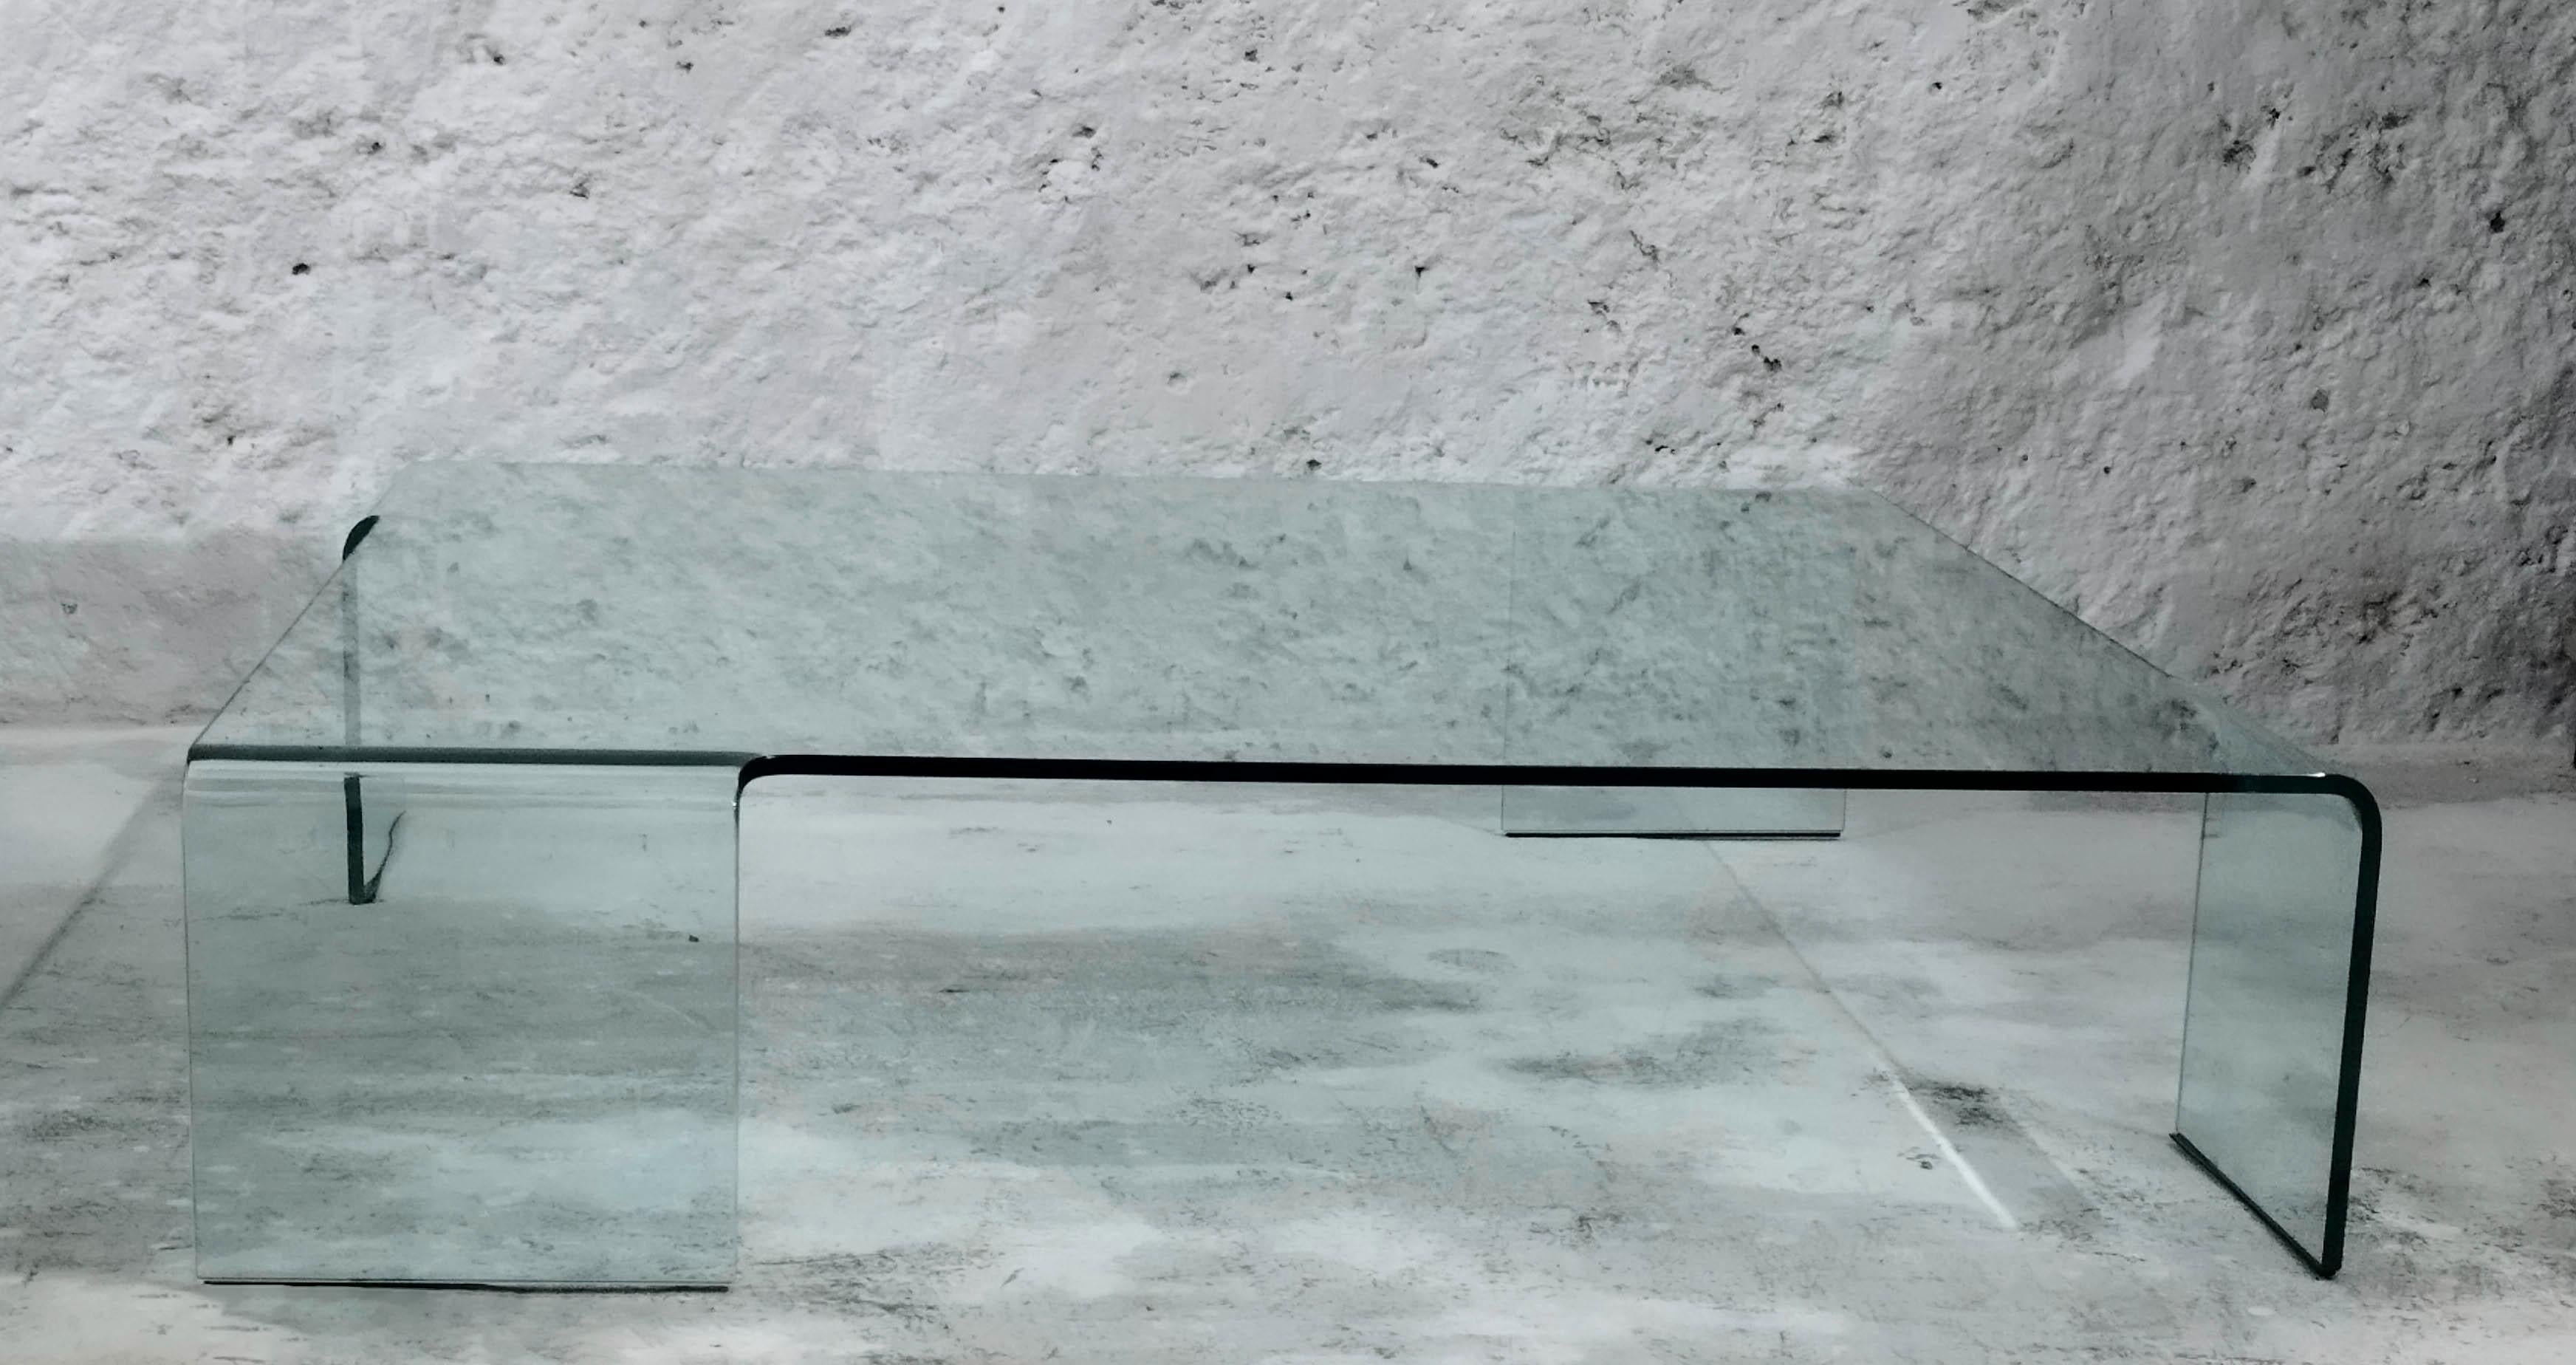 Rodolfo Dordoni has designed several pieces of furniture for FIAM, including Neutra, the low table in curved glass.
Architect and designer Rodolfo Dordoni was born in 1954 in Milan, where he graduated in architecture in 1979.
His expertise in design